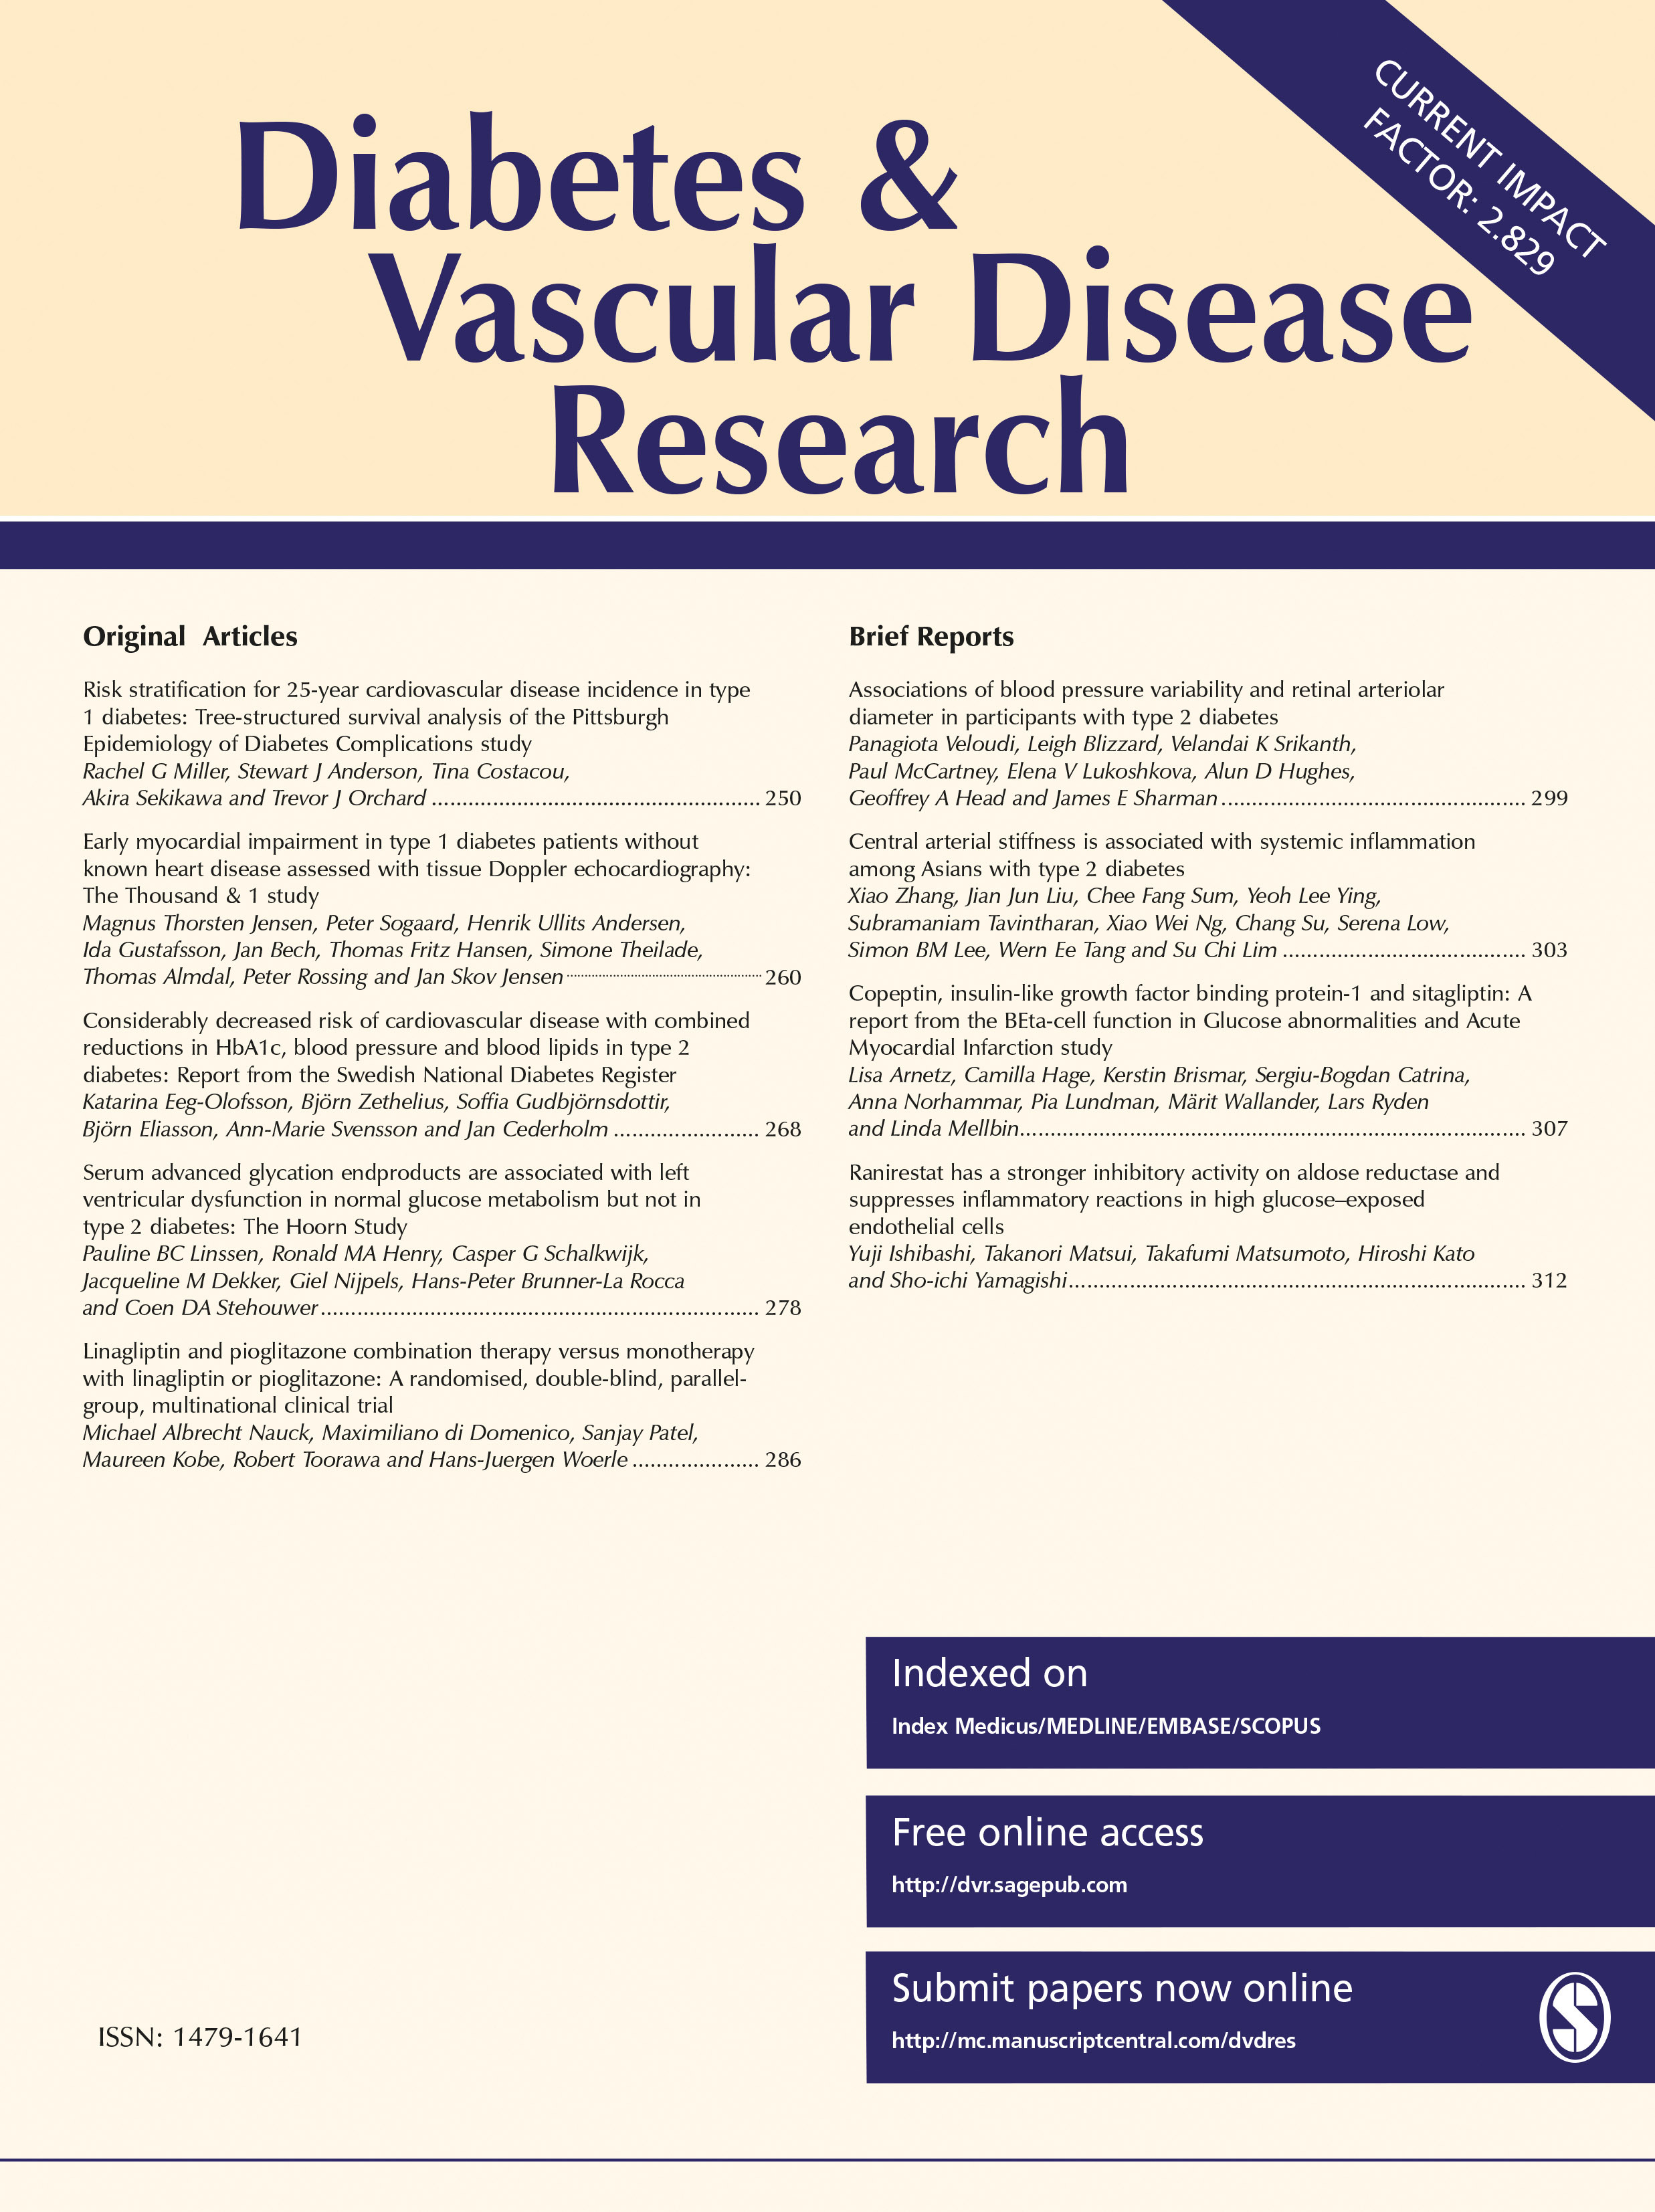 Diabetes and Vascular Disease Research 